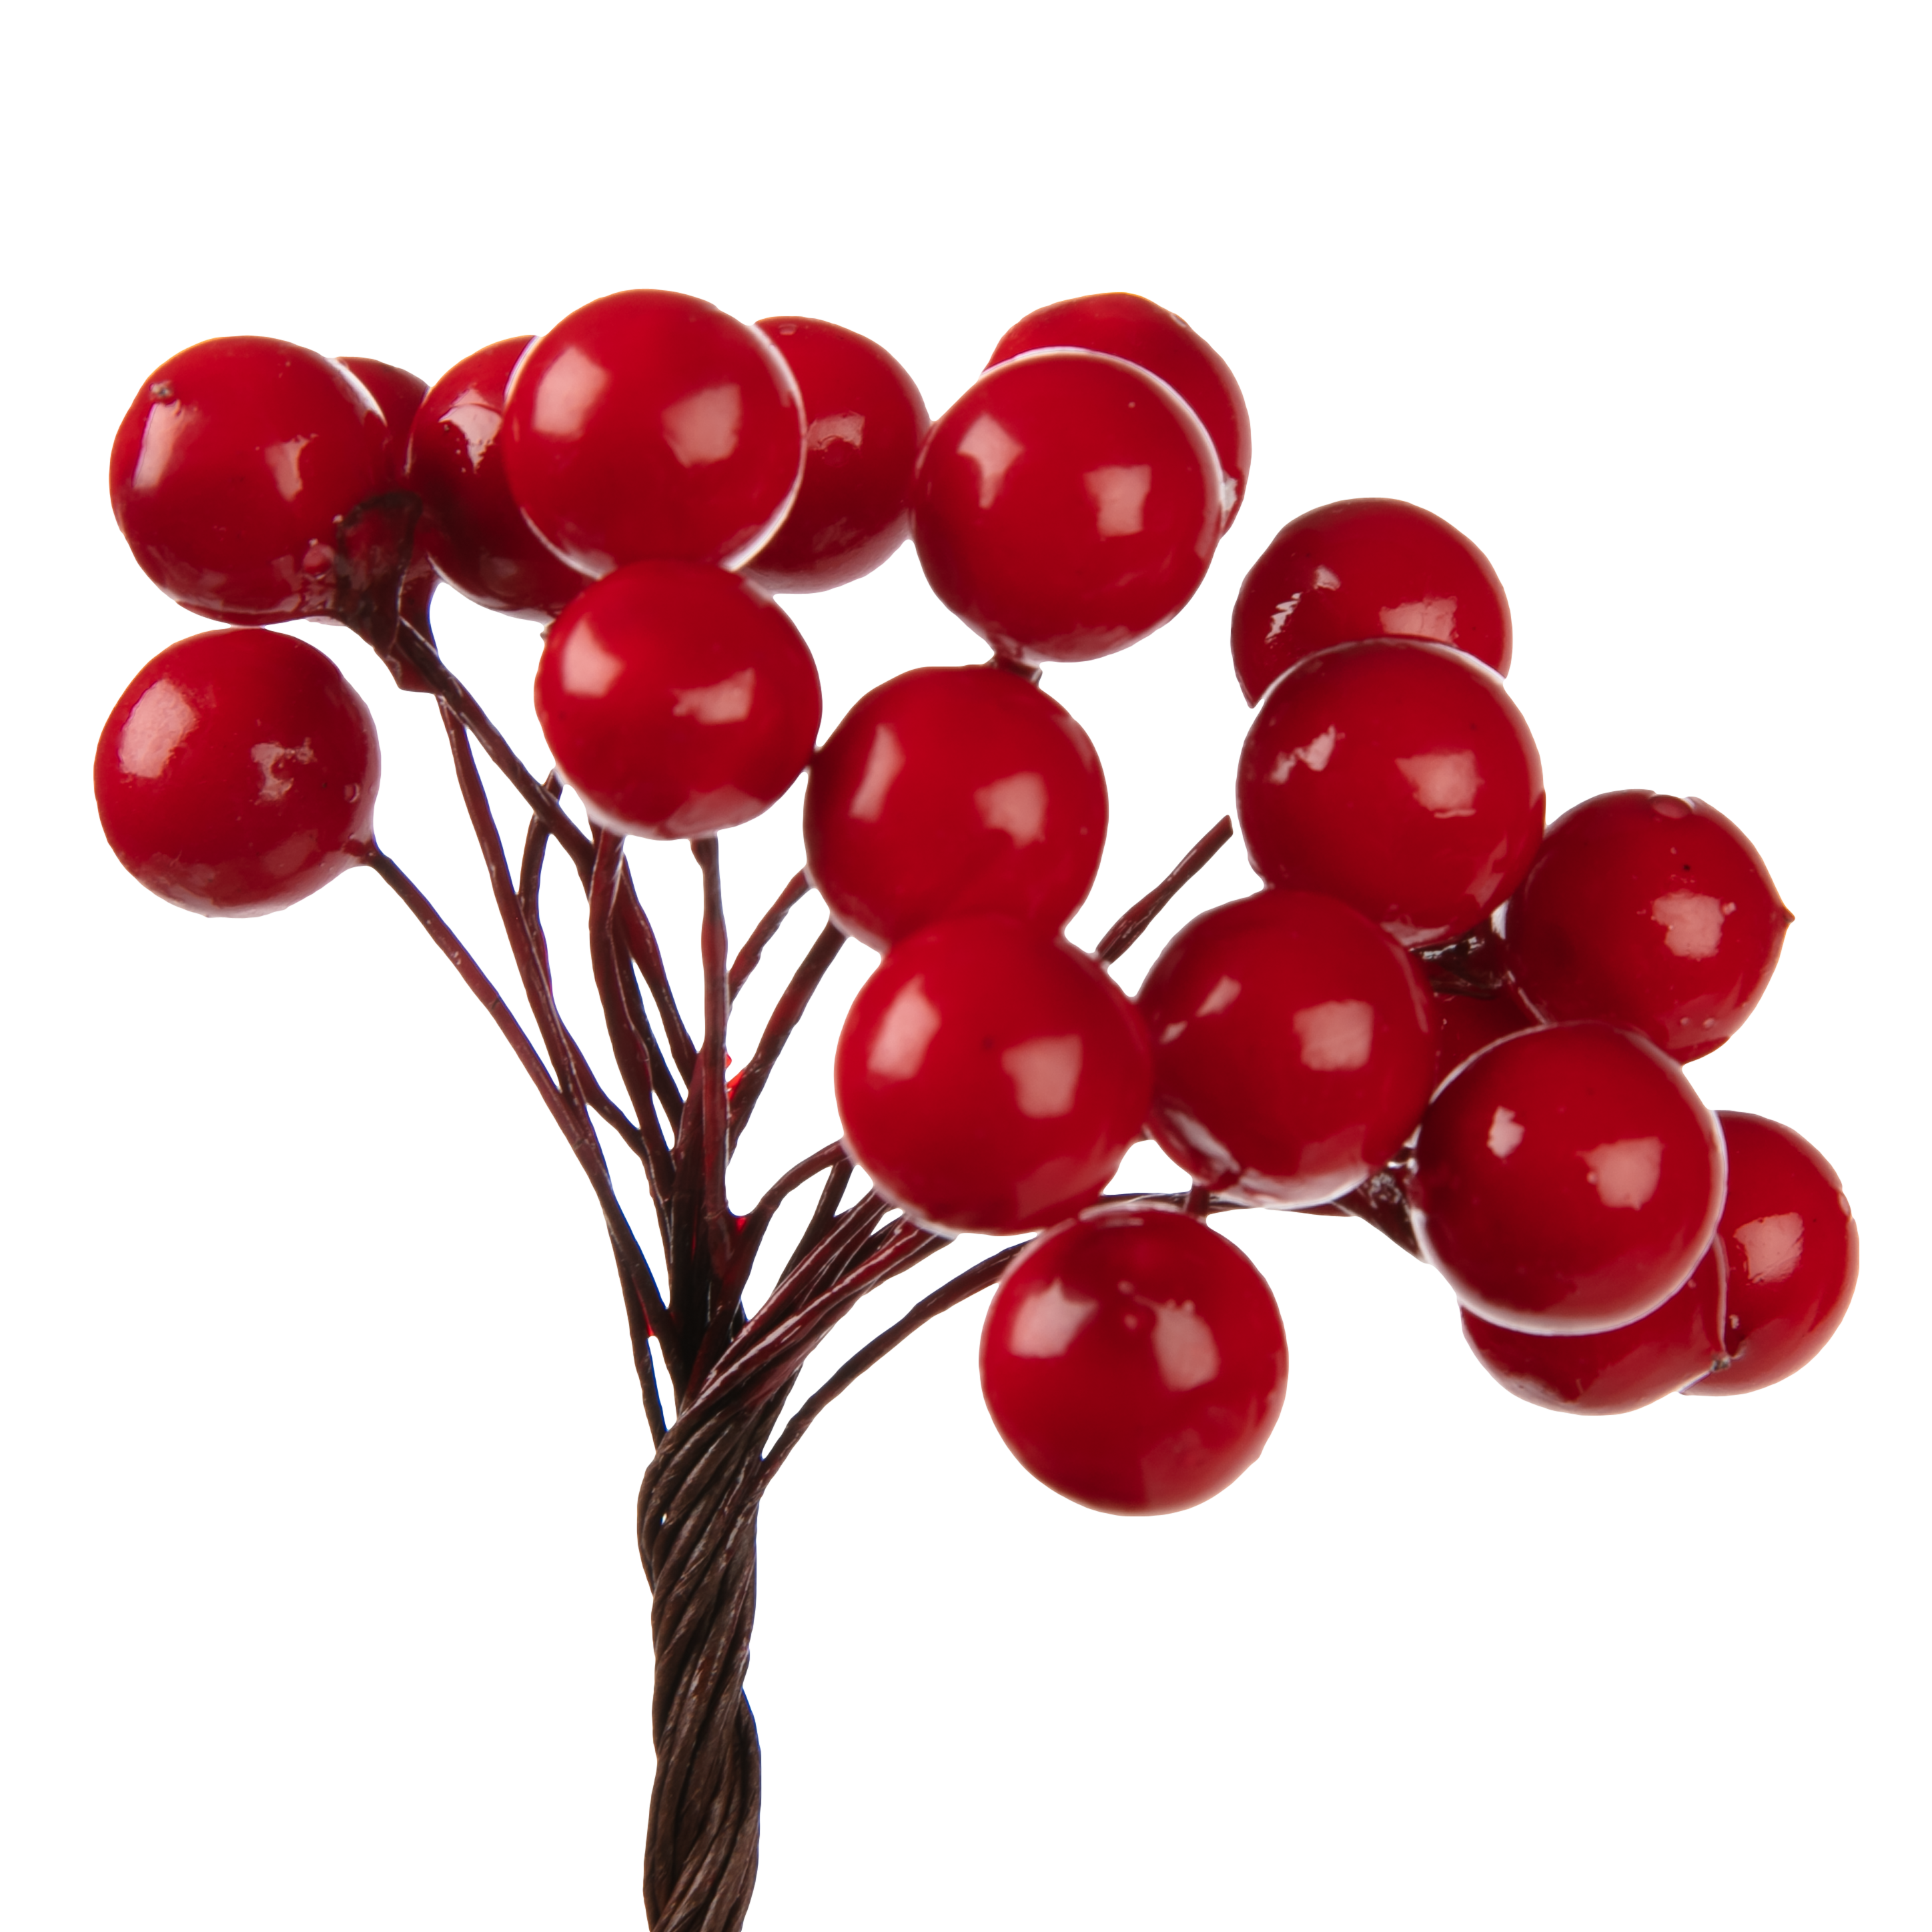 https://www.shopriot.shop/wp-content/uploads/1689/21/unleash-potential-by-using-make-a-merry-christmas-red-berry-stems-40-piece-858_1.png